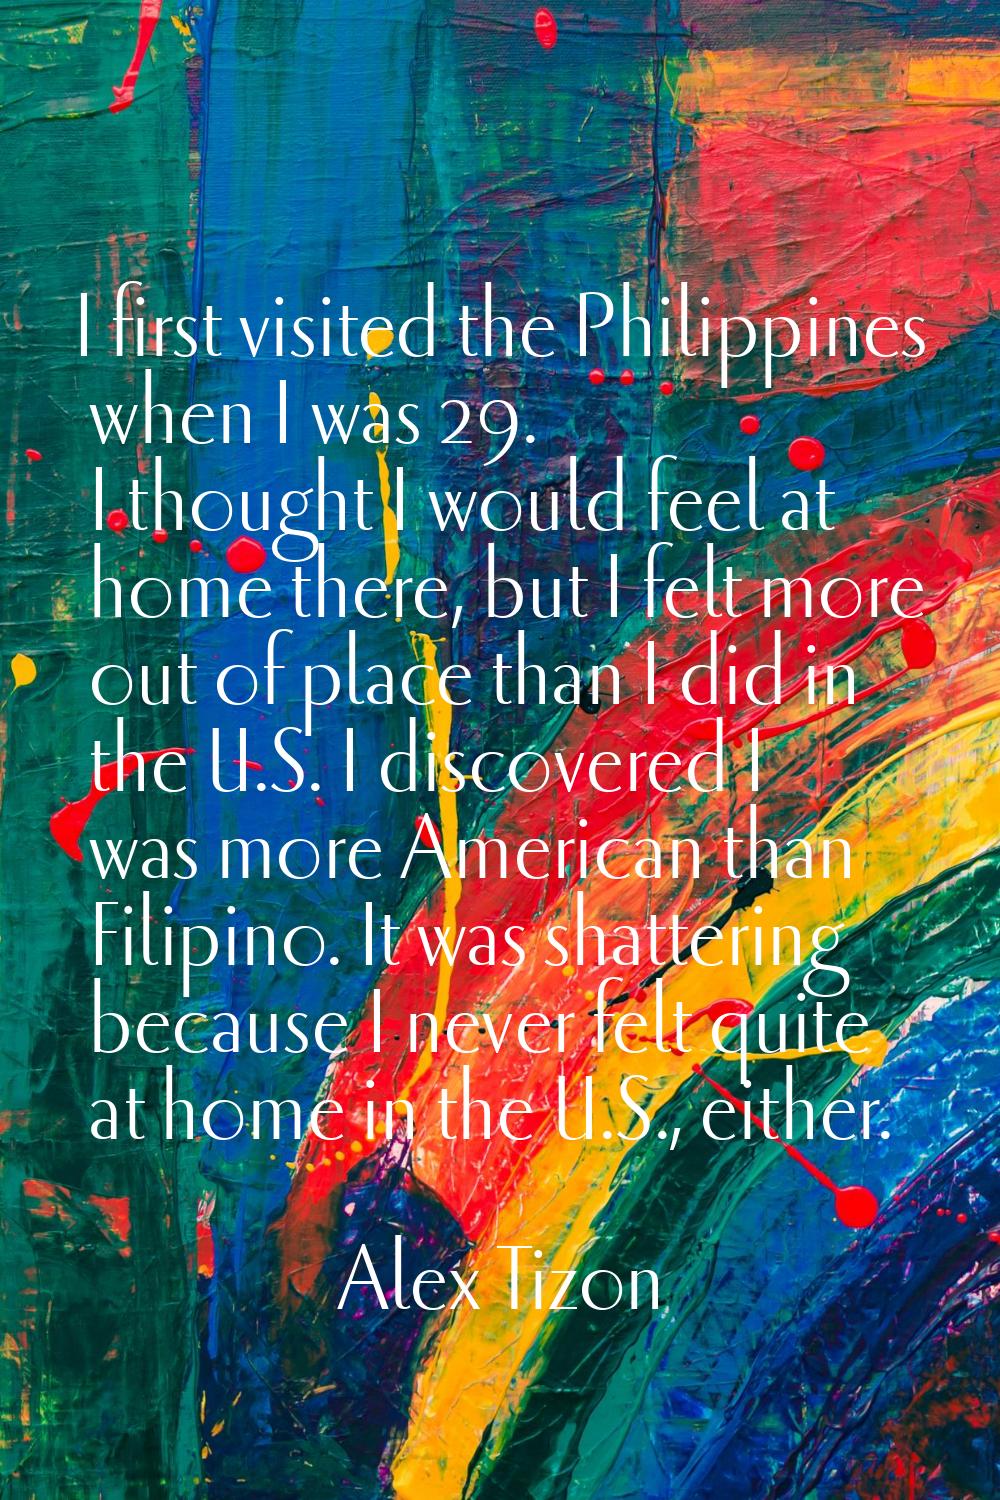 I first visited the Philippines when I was 29. I thought I would feel at home there, but I felt mor